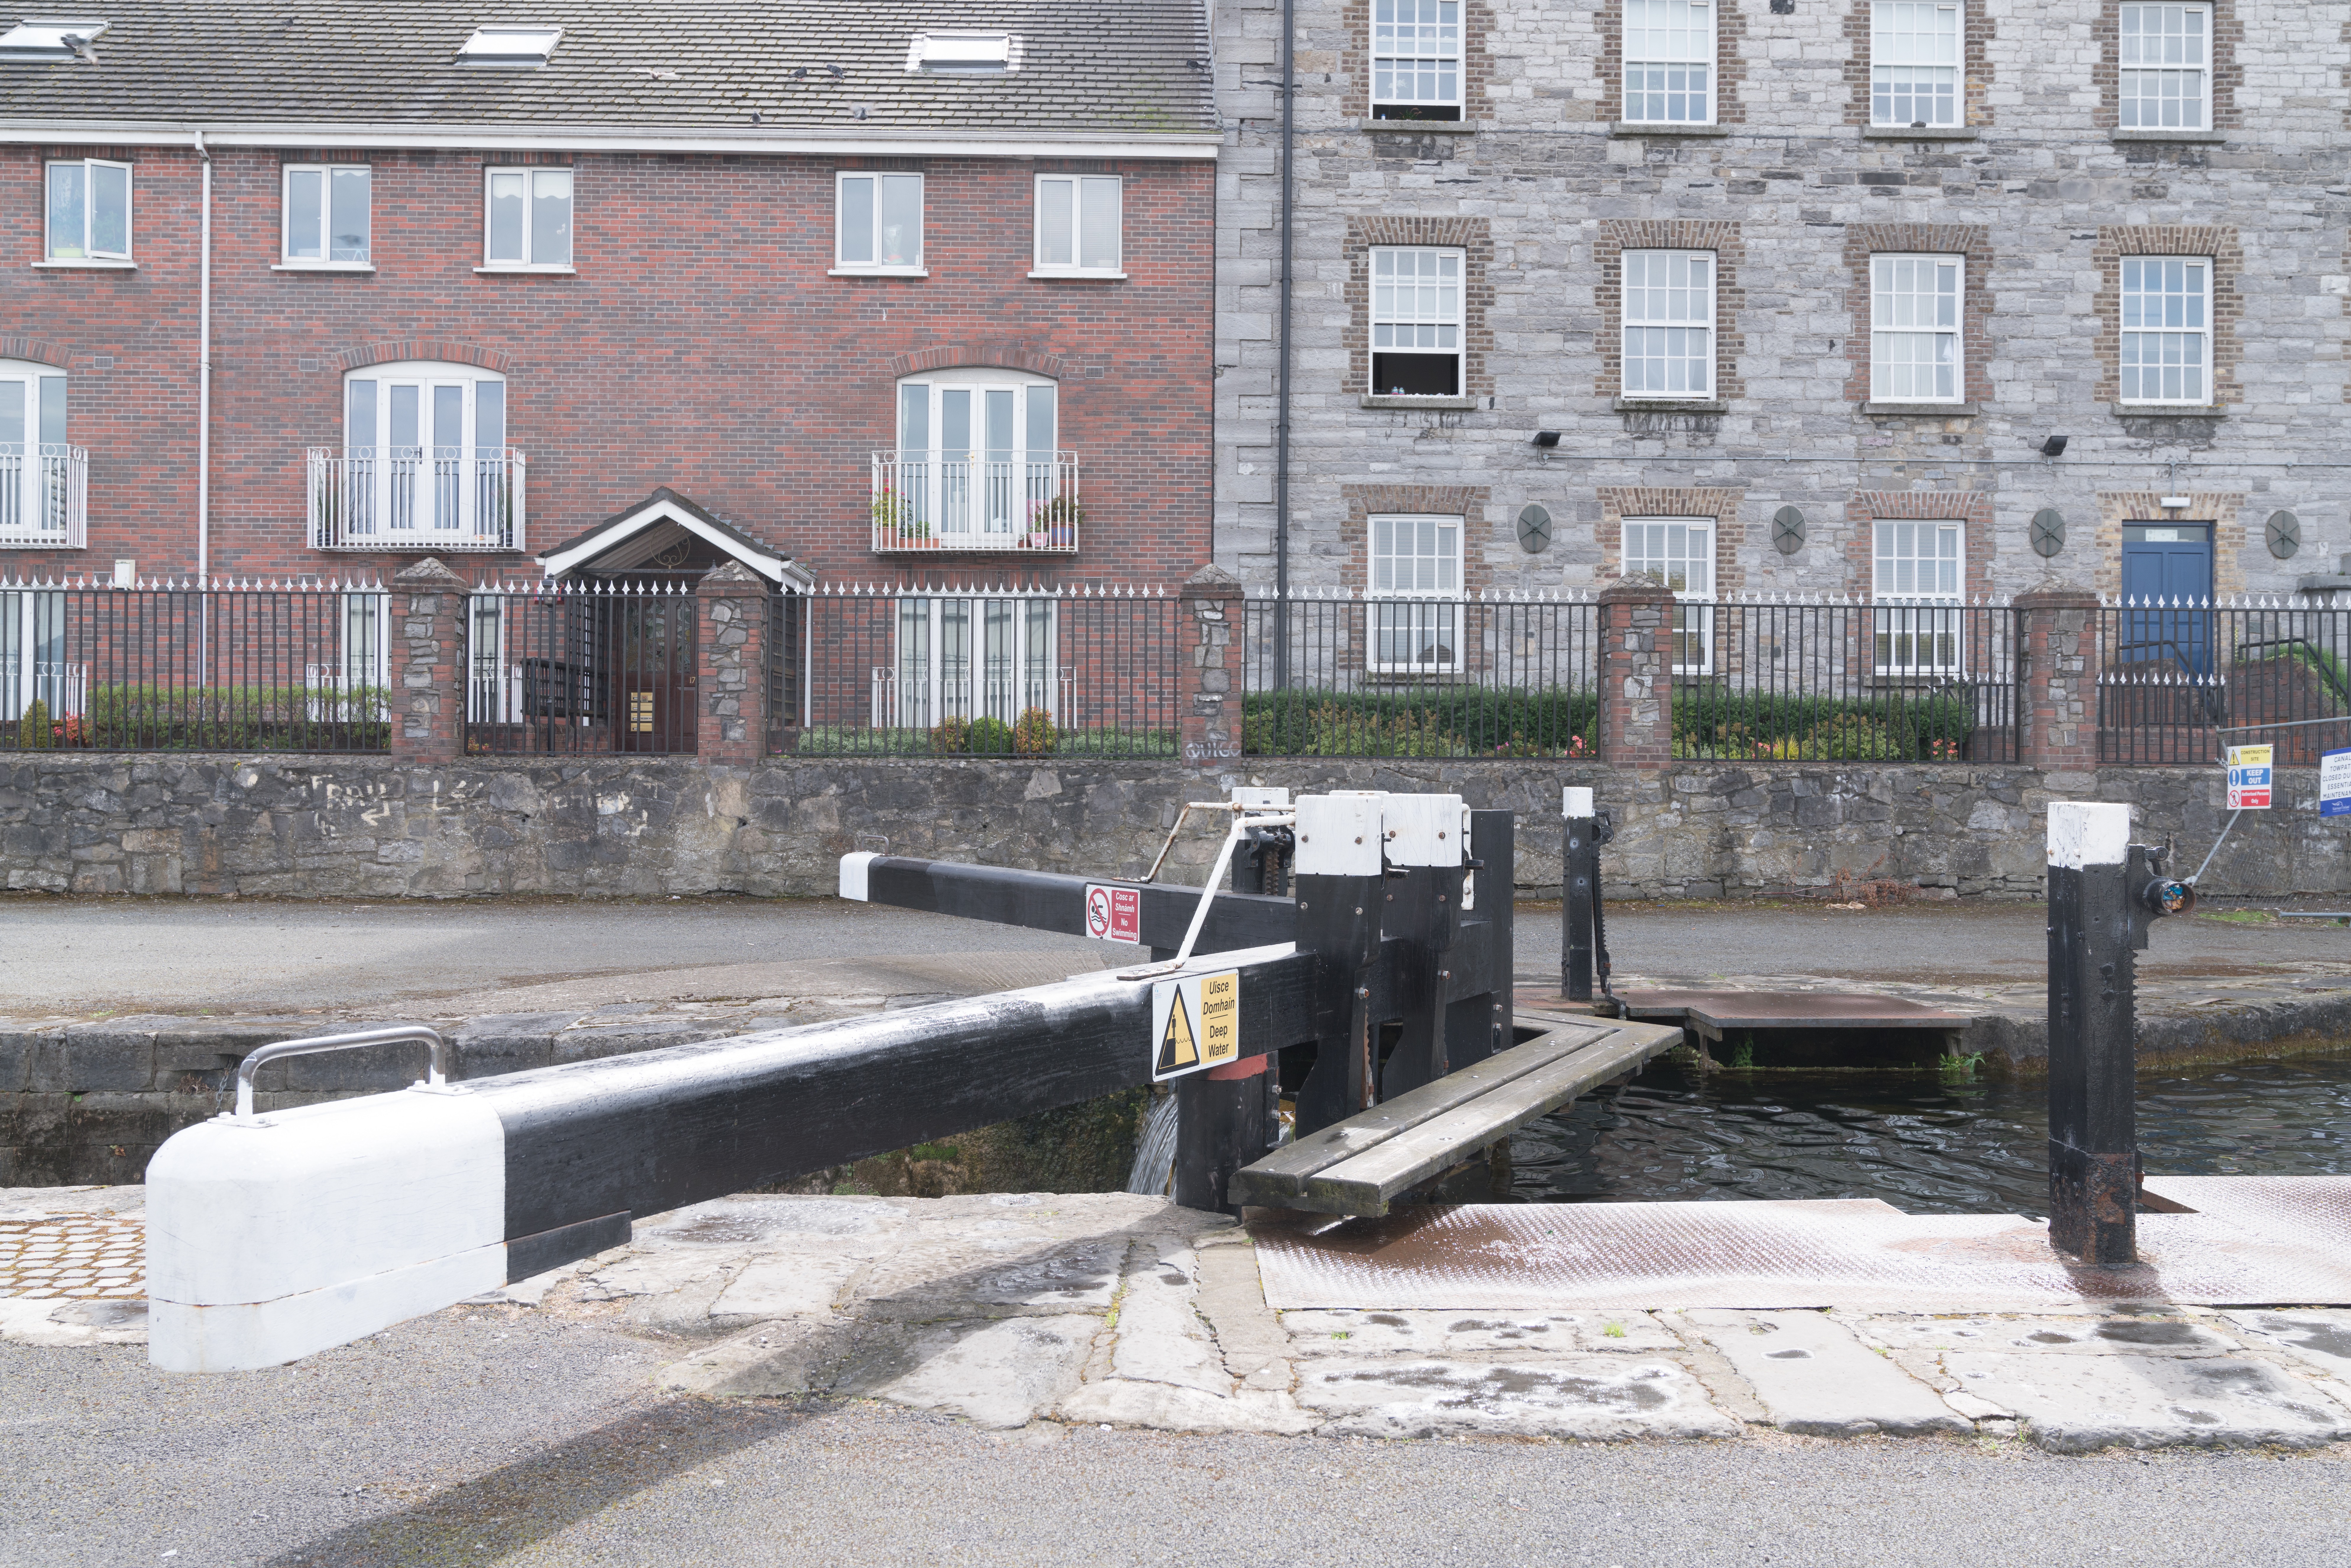  ROYAL CANAL - CABRA AREA 028 